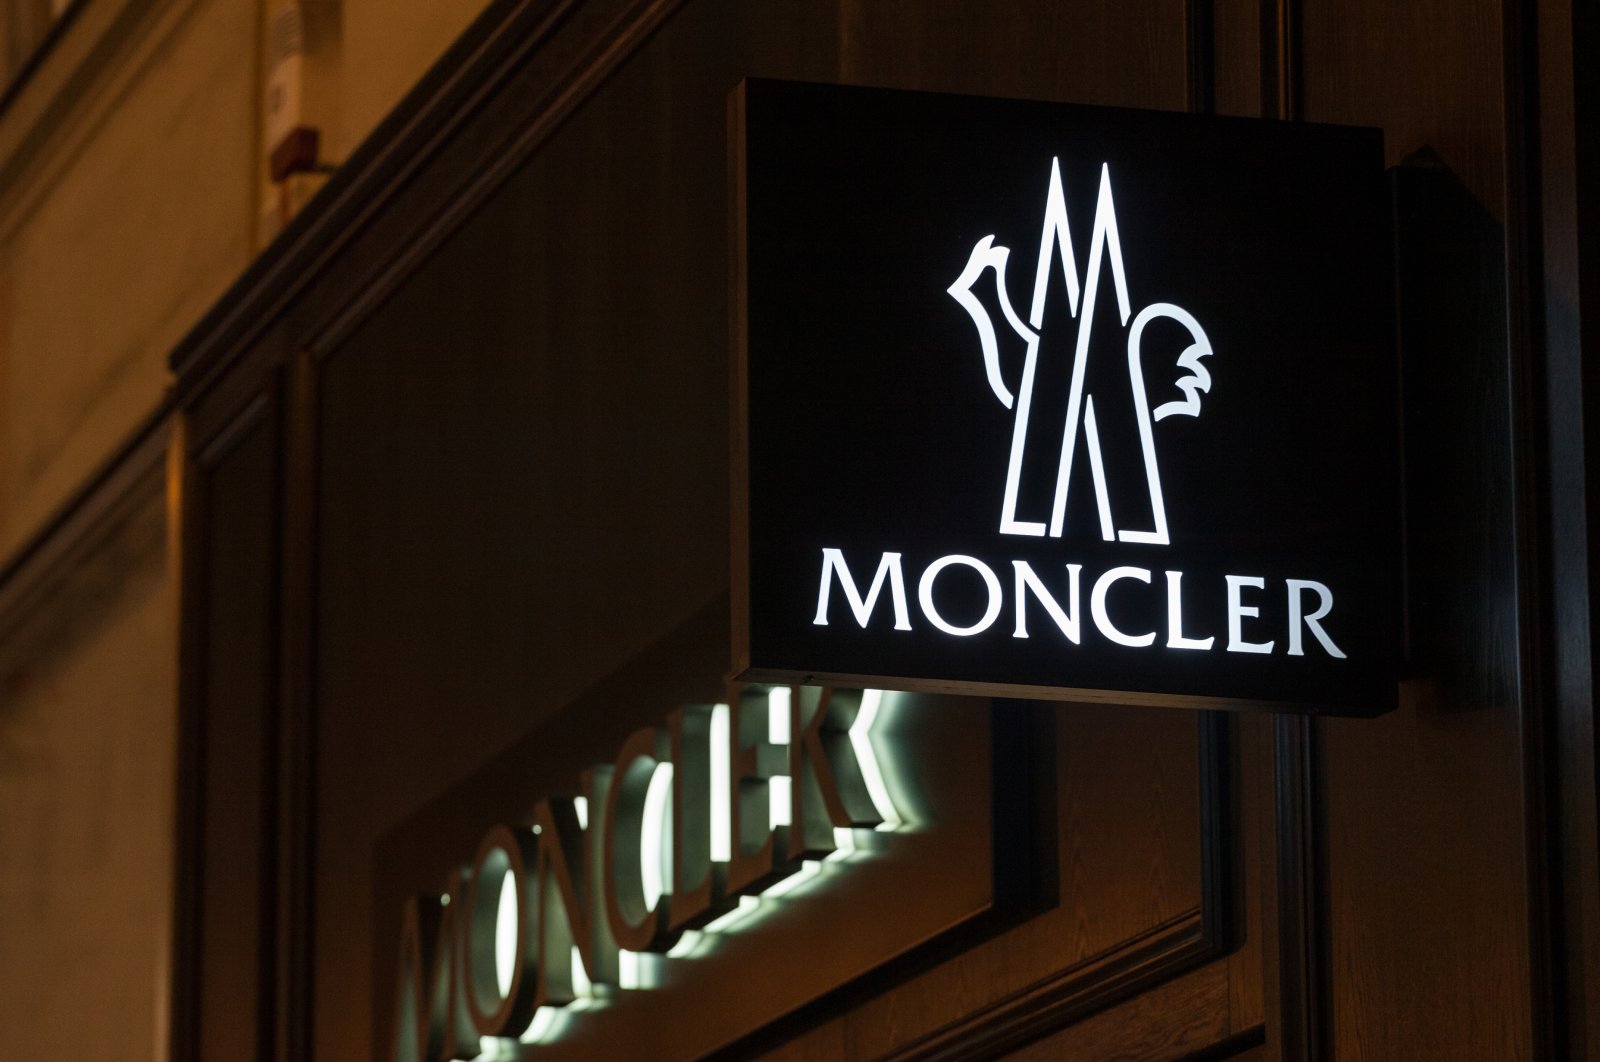 The Moncler logo in front of their boutique for Vienna. (Shutterstock Photo)